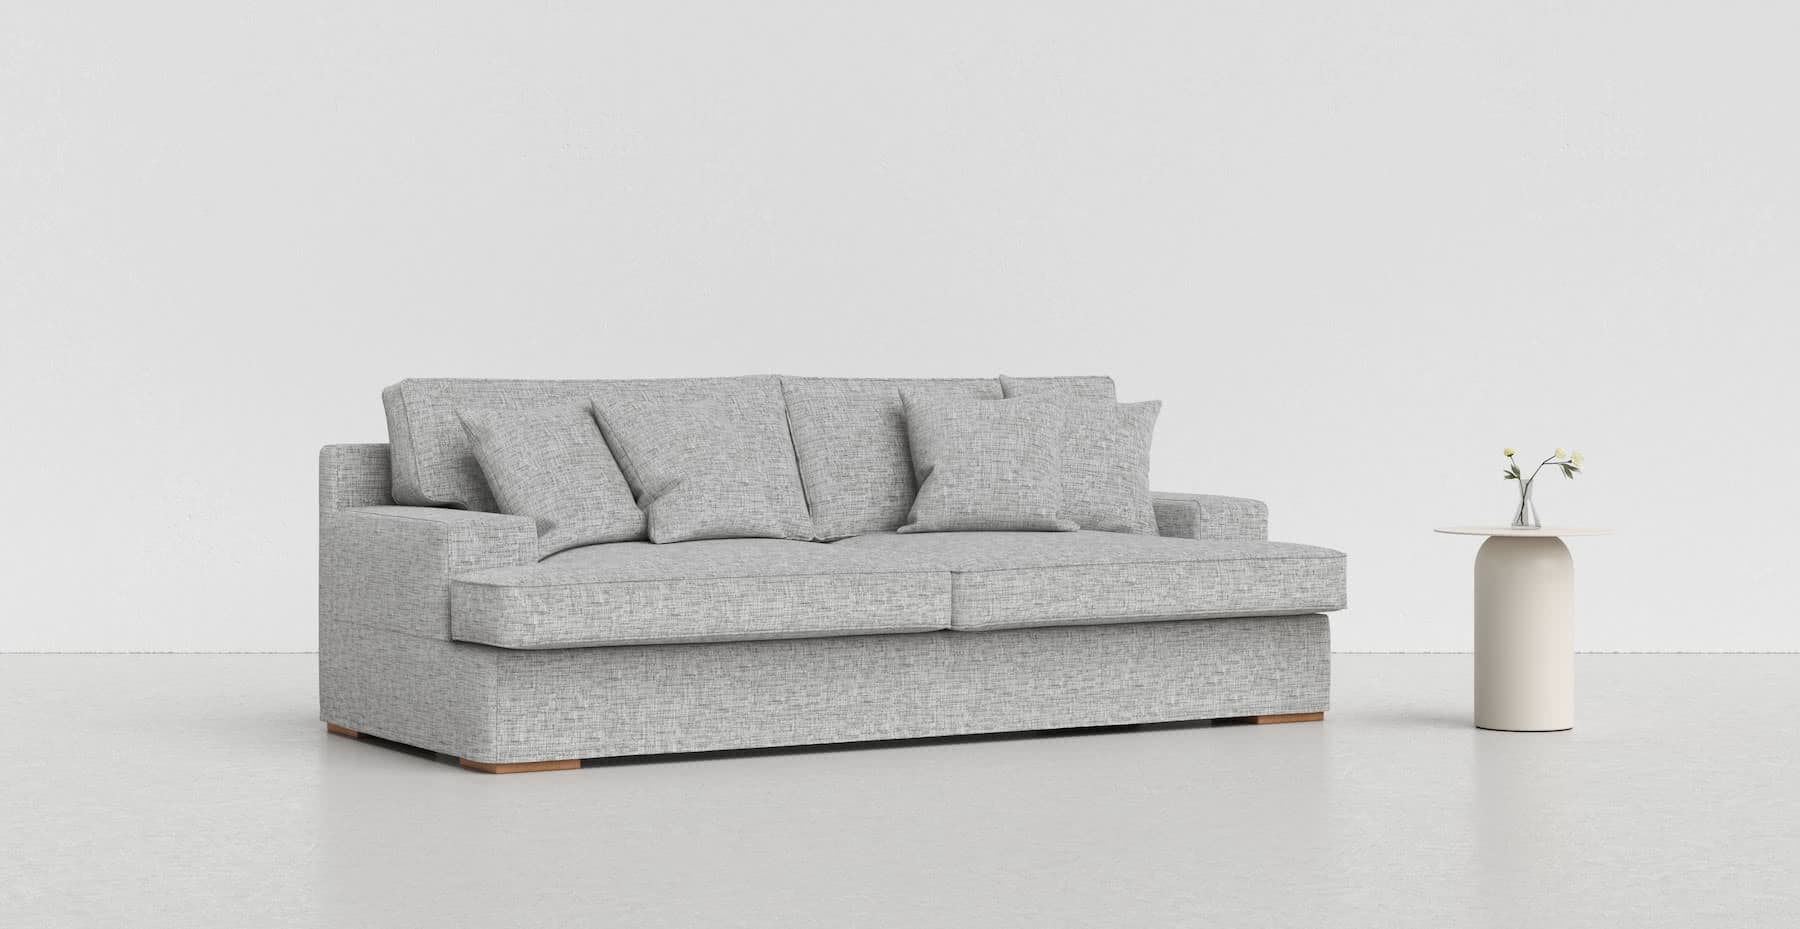 A medium grey Goteborg sofa on a lighter grey background with a white vase beside it